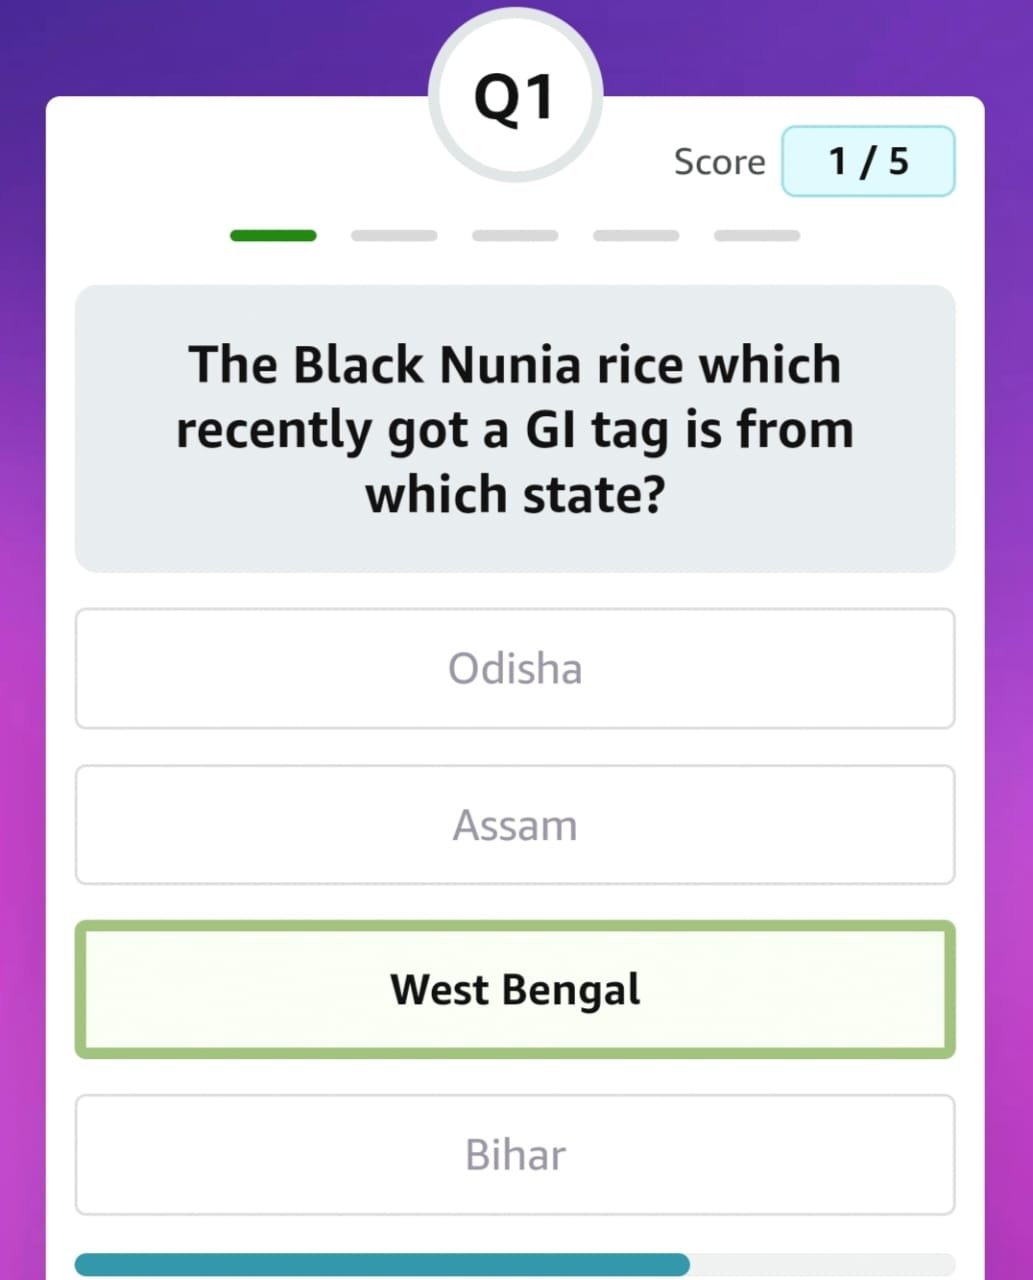 The Black Nunia rice which recently got a GI tag is from which state